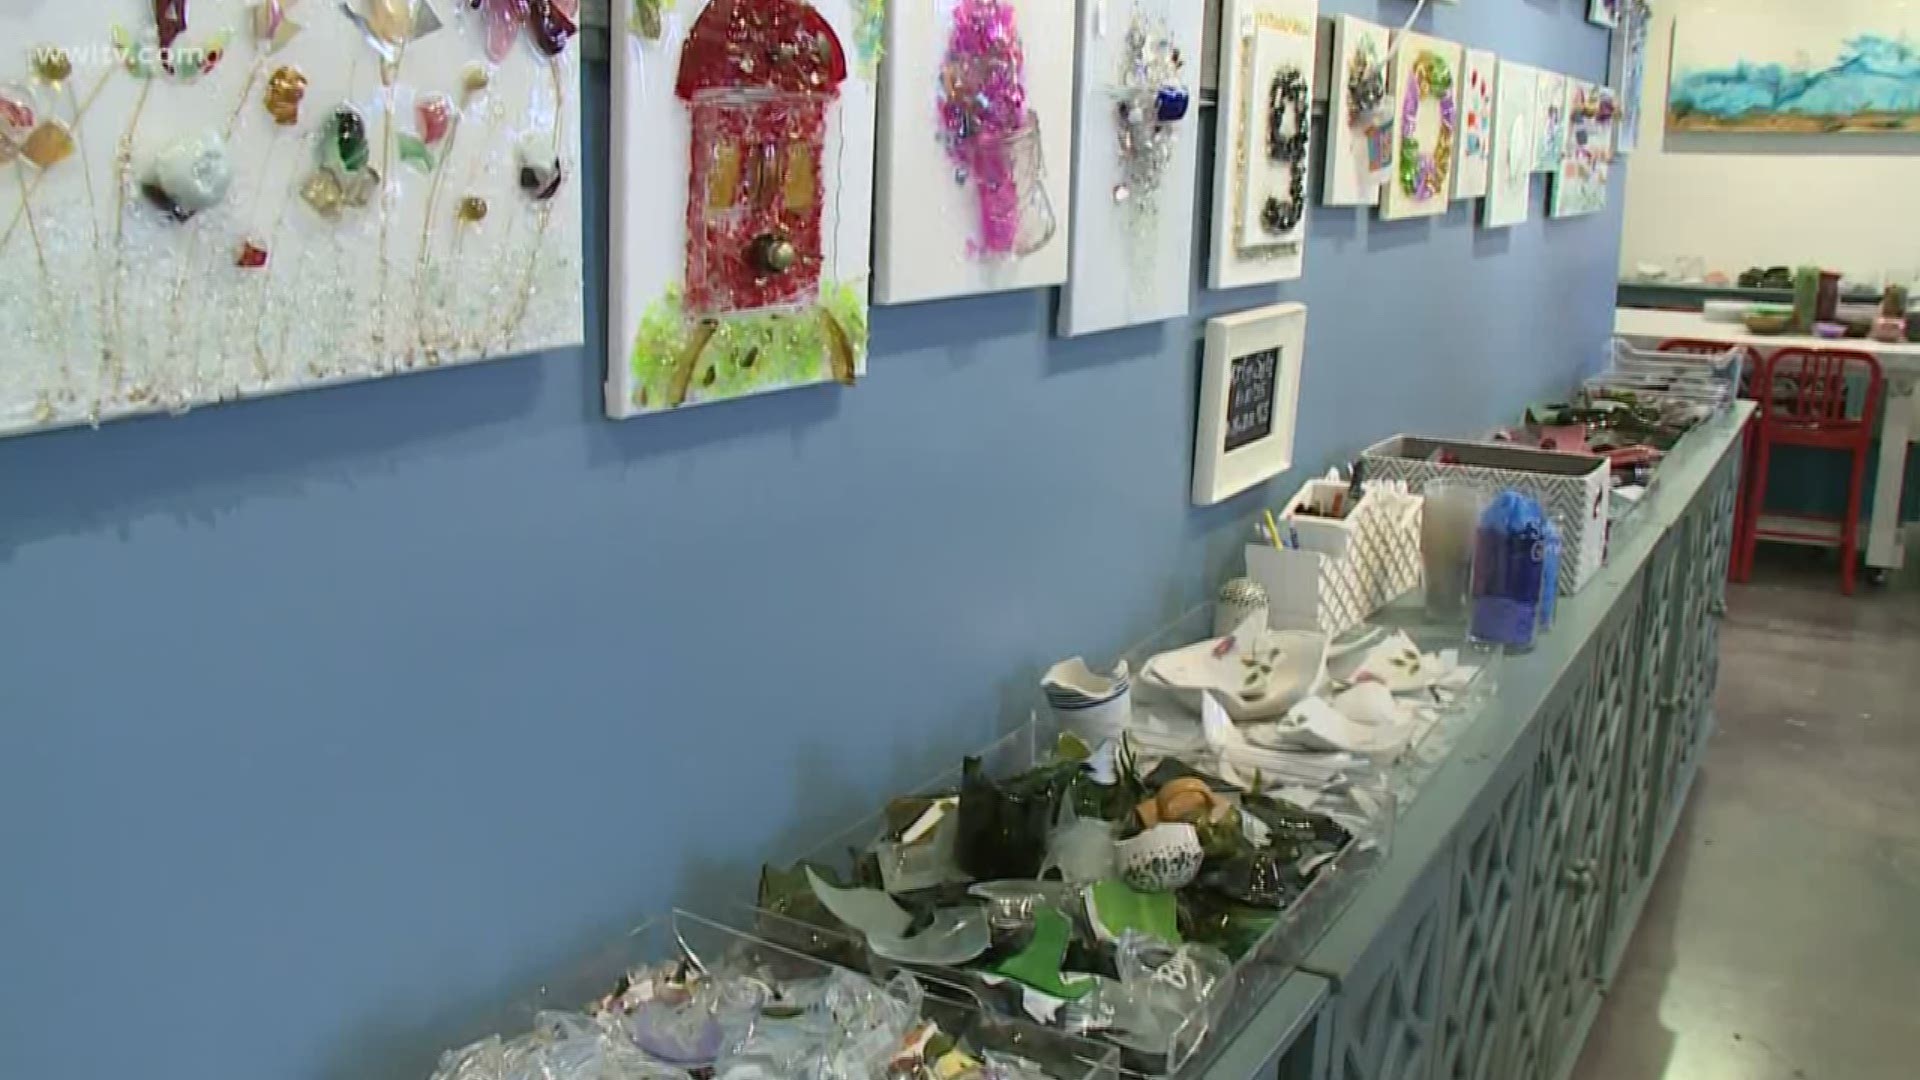 Old glass finds new life at this art shop!